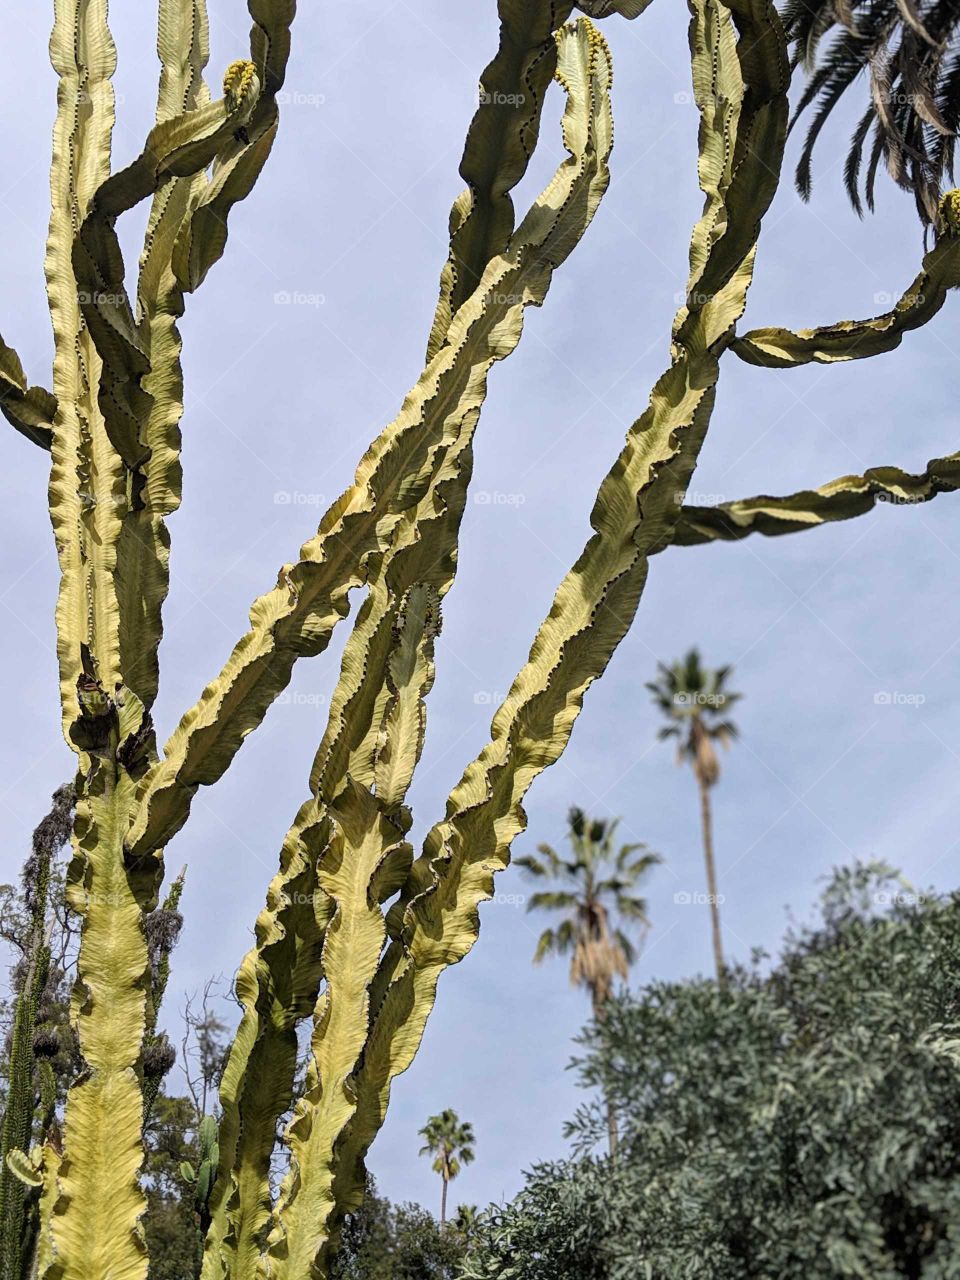 tall cactus in foreground with palm trees in background